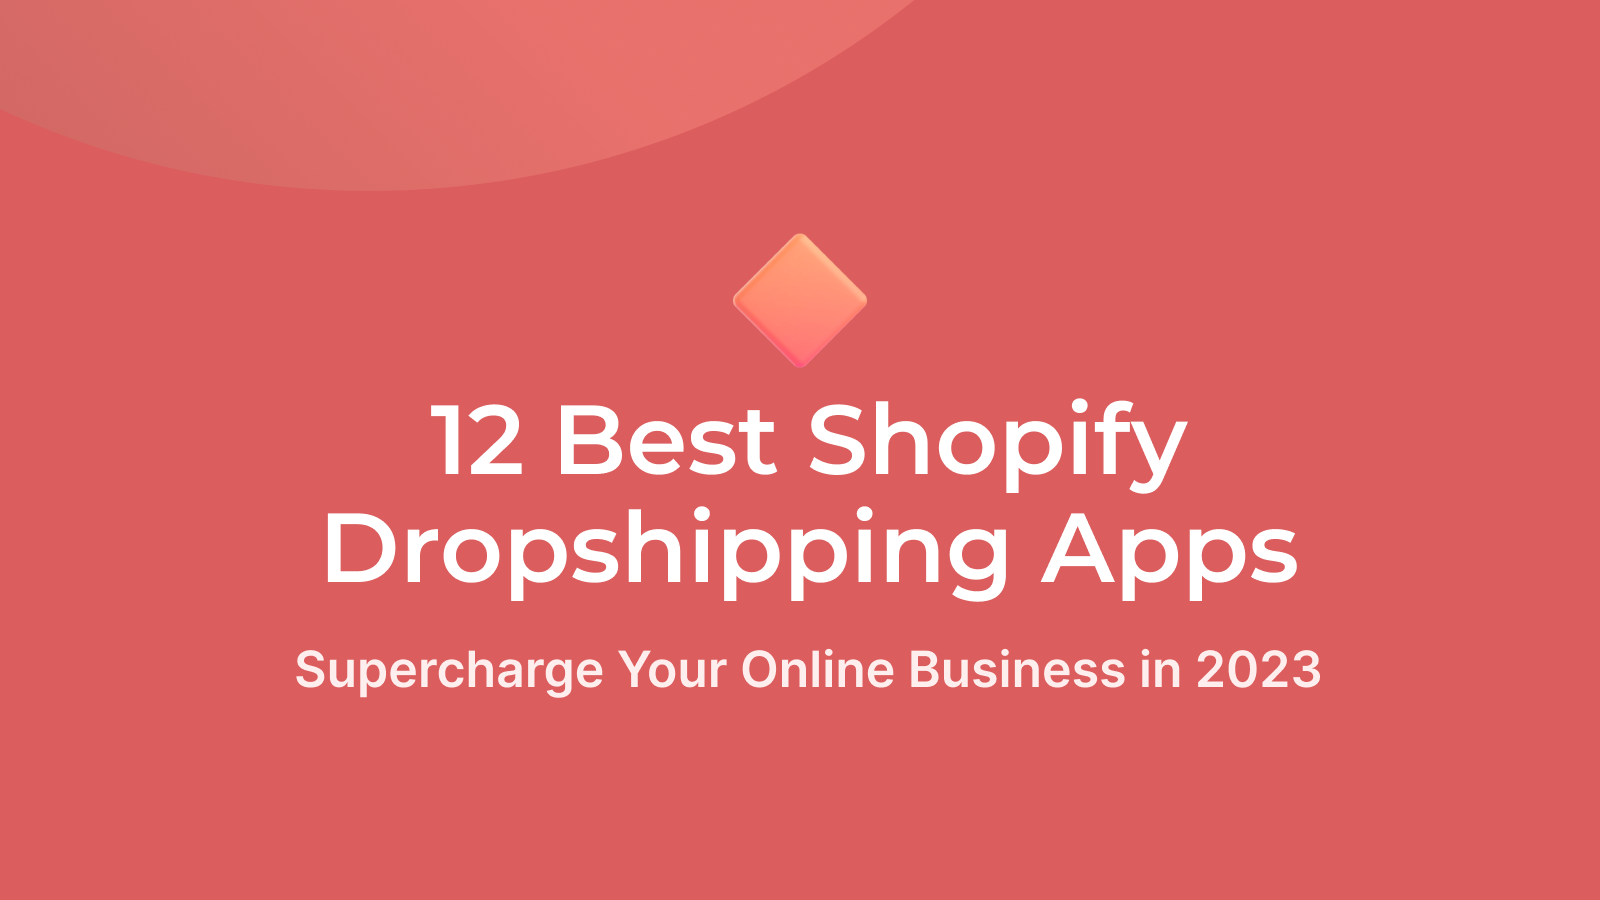 12 Best Shopify Dropshipping apps Supercharge Your Online Business in 2023